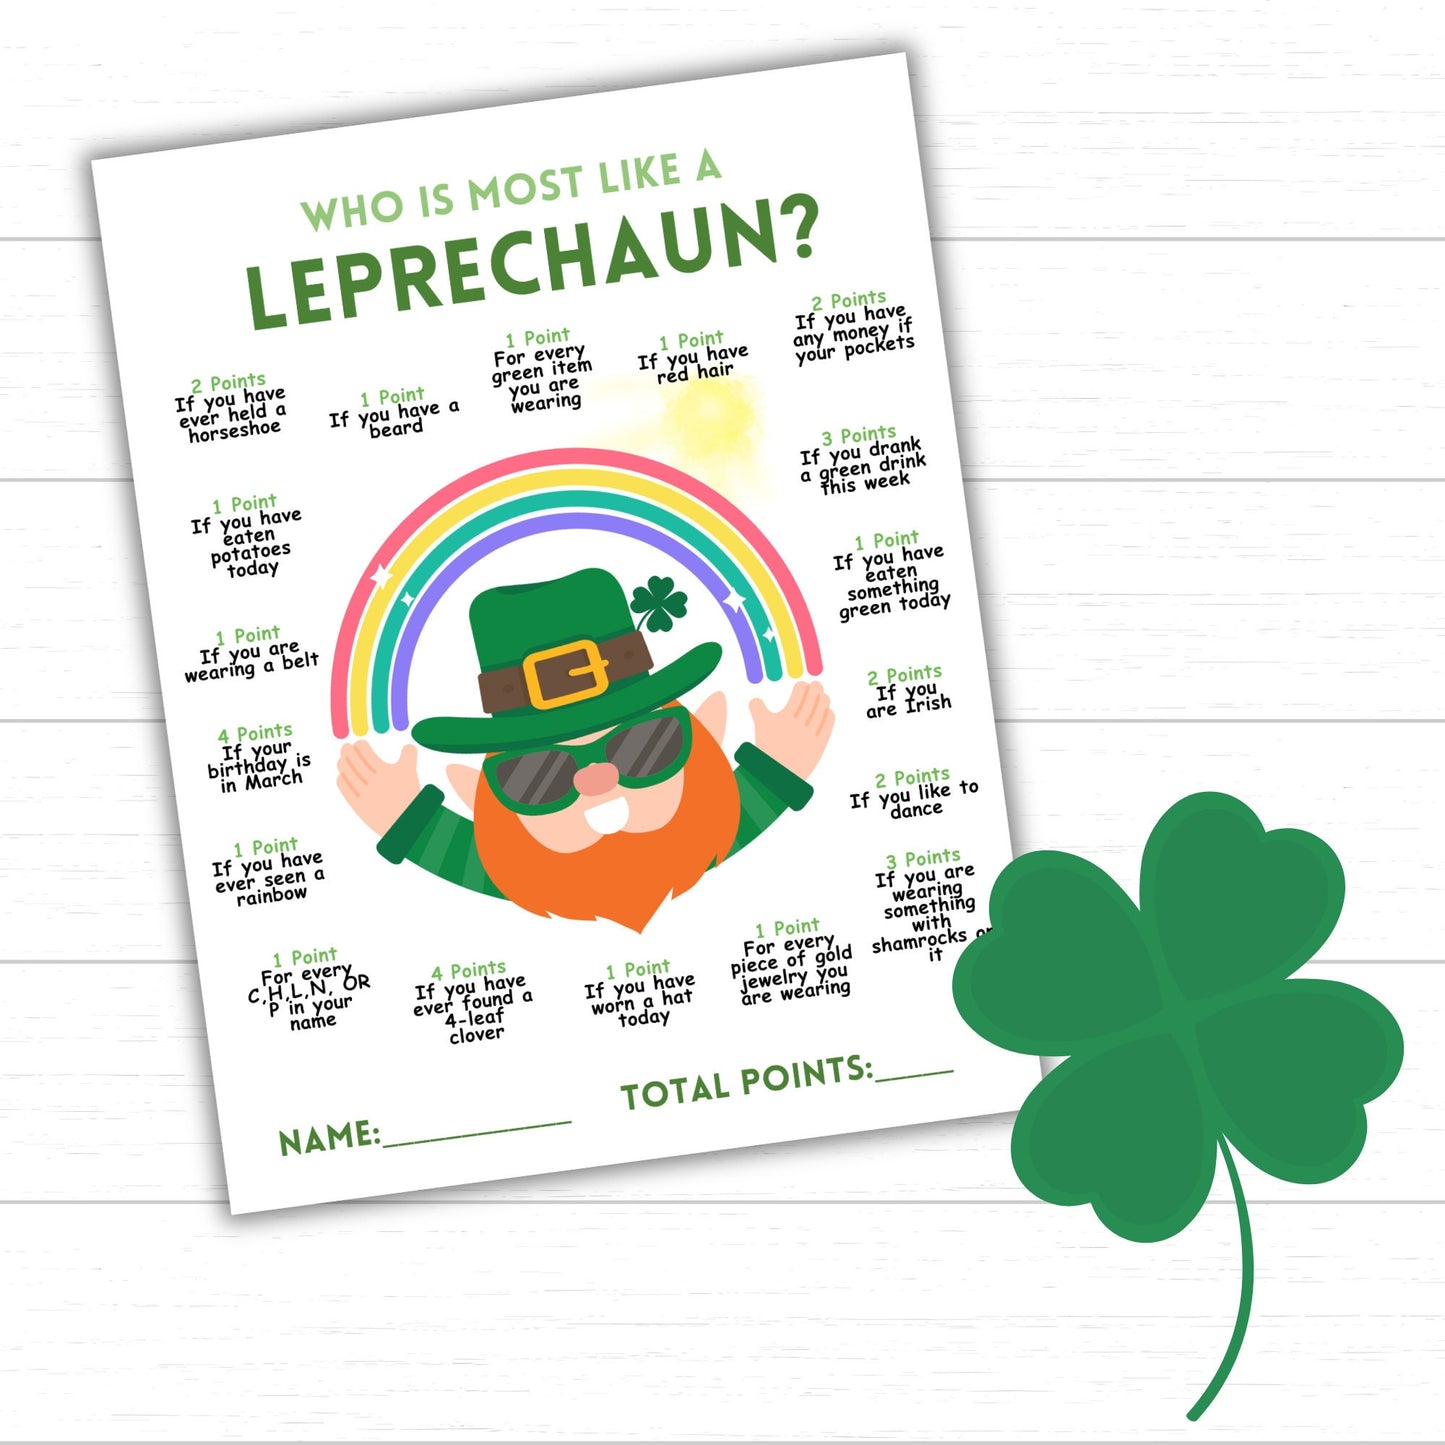 Who is Most Like a Leprechaun? Game